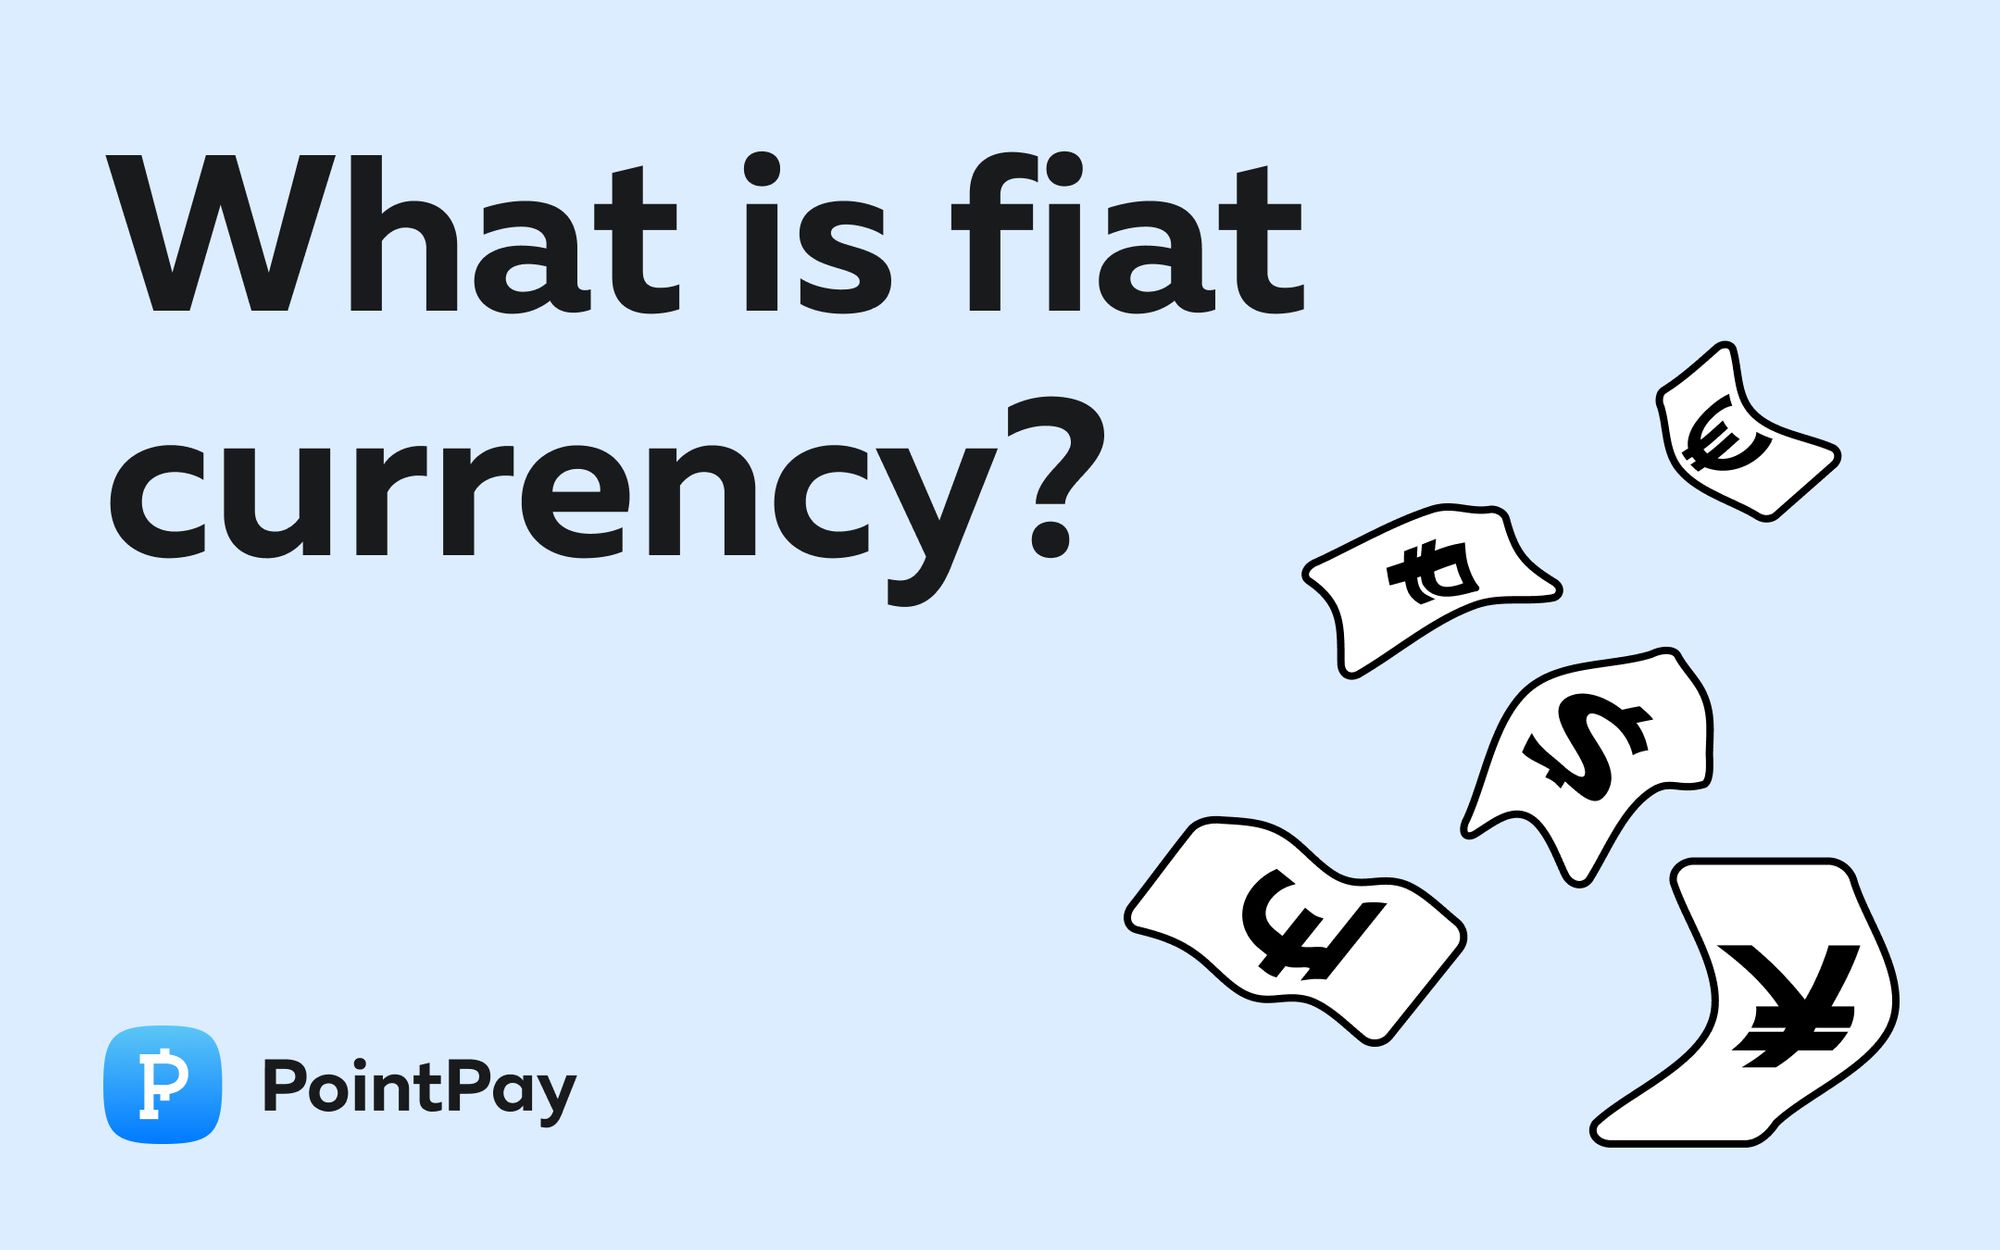 What is fiat currency?